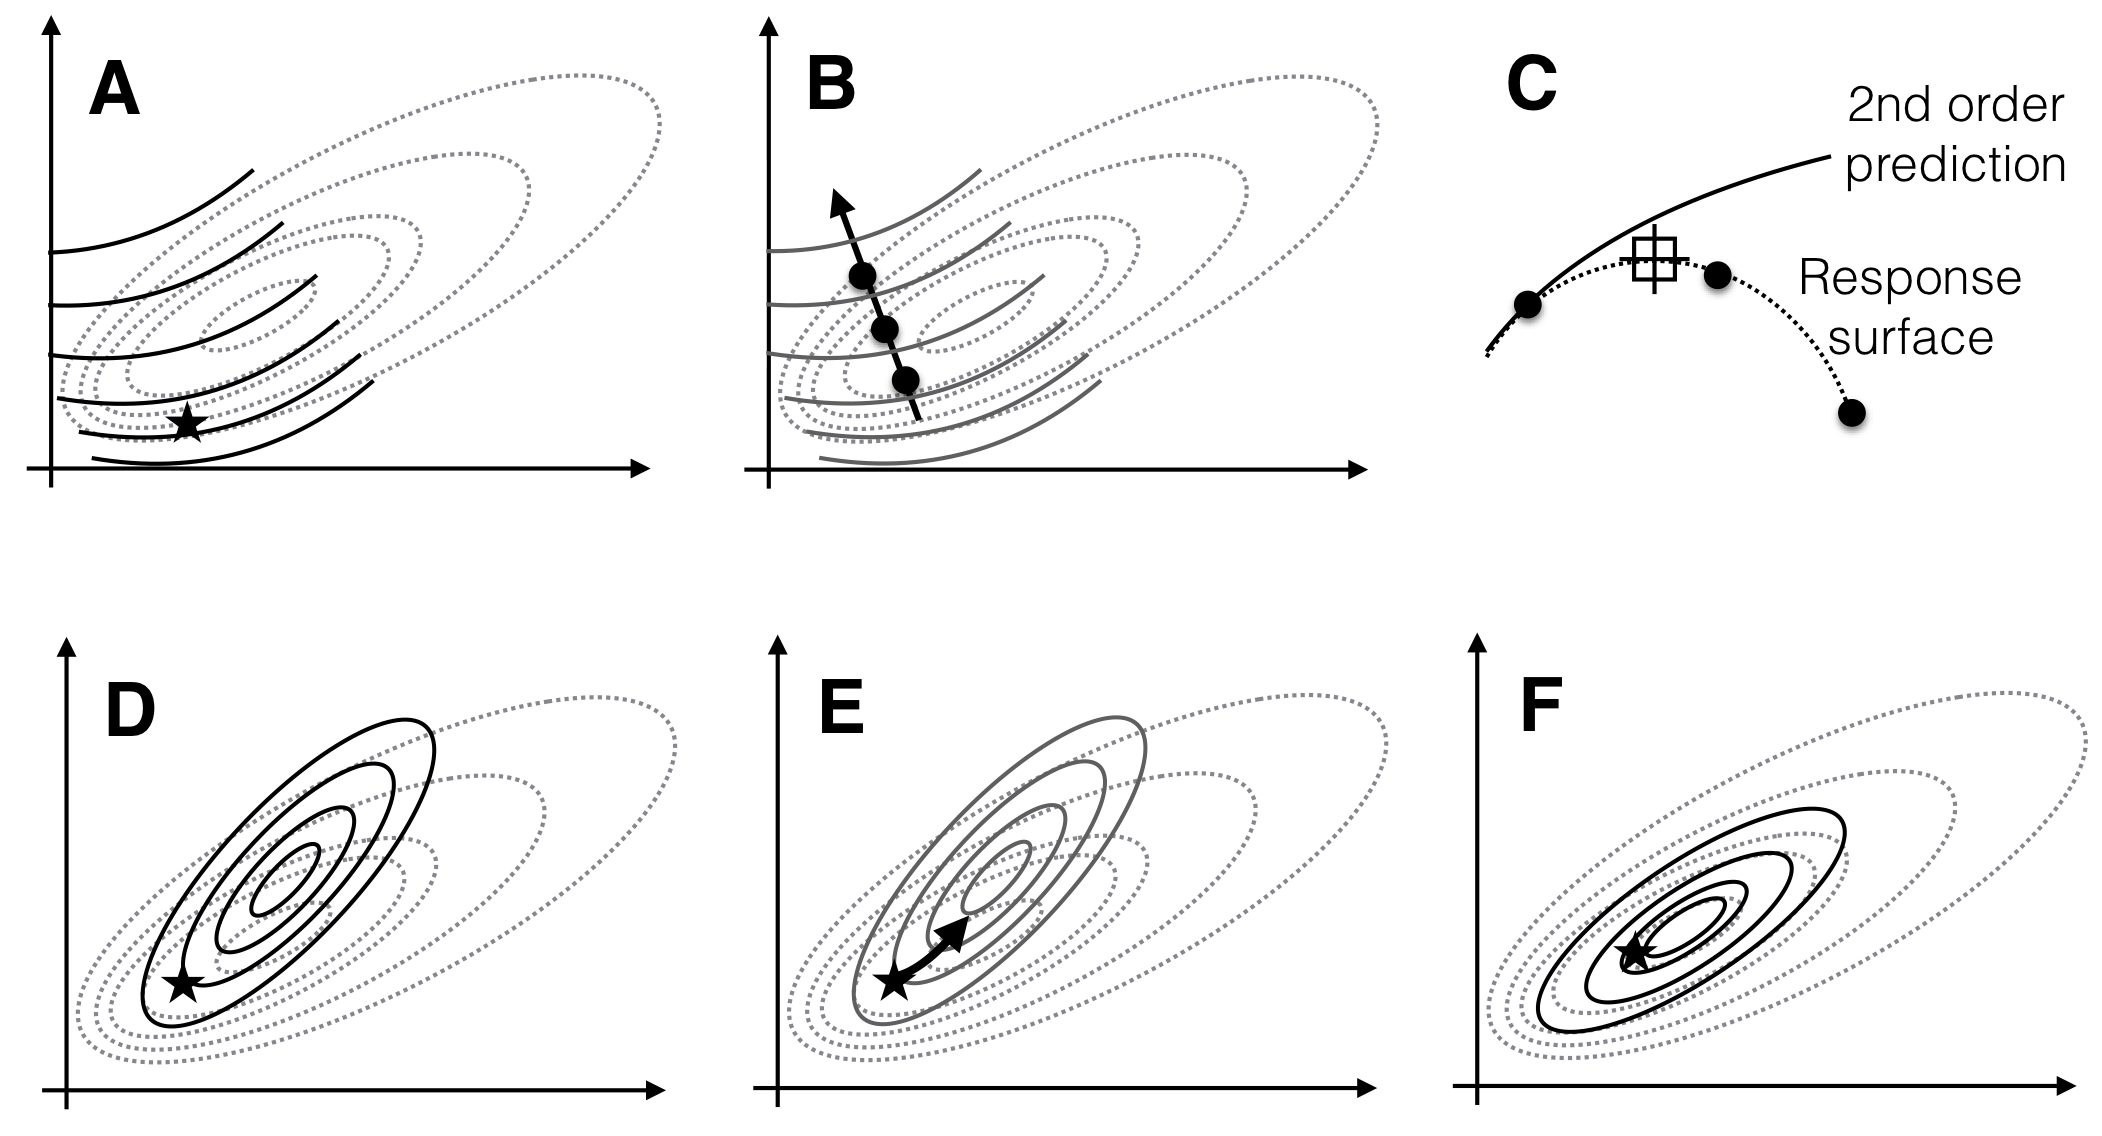 Sequential experimentation for optimizing conditions using second-order approximations. A: First approximation (solid lines) of true response surface (dotted lines) around a starting point (star). B: Pursuing the path of steepest ascent yields a new best condition. C: Slice along the path of steepest ascent. D: Second approximation around new best condition. E: Path of steepest ascent based on second approximation. F: Third approximation captures the properties of the response surface around the optimum.